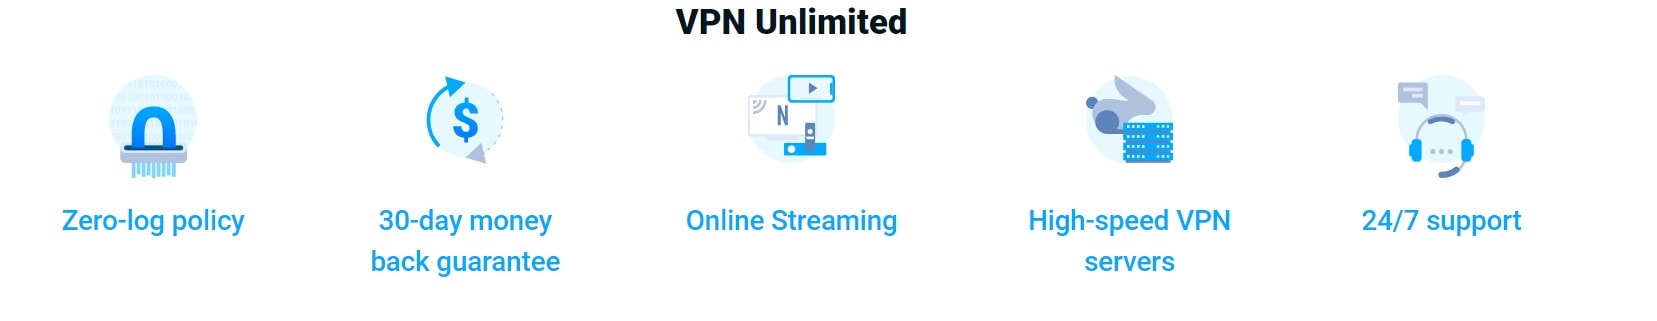 Features of KeepSolid VPN Unlimited